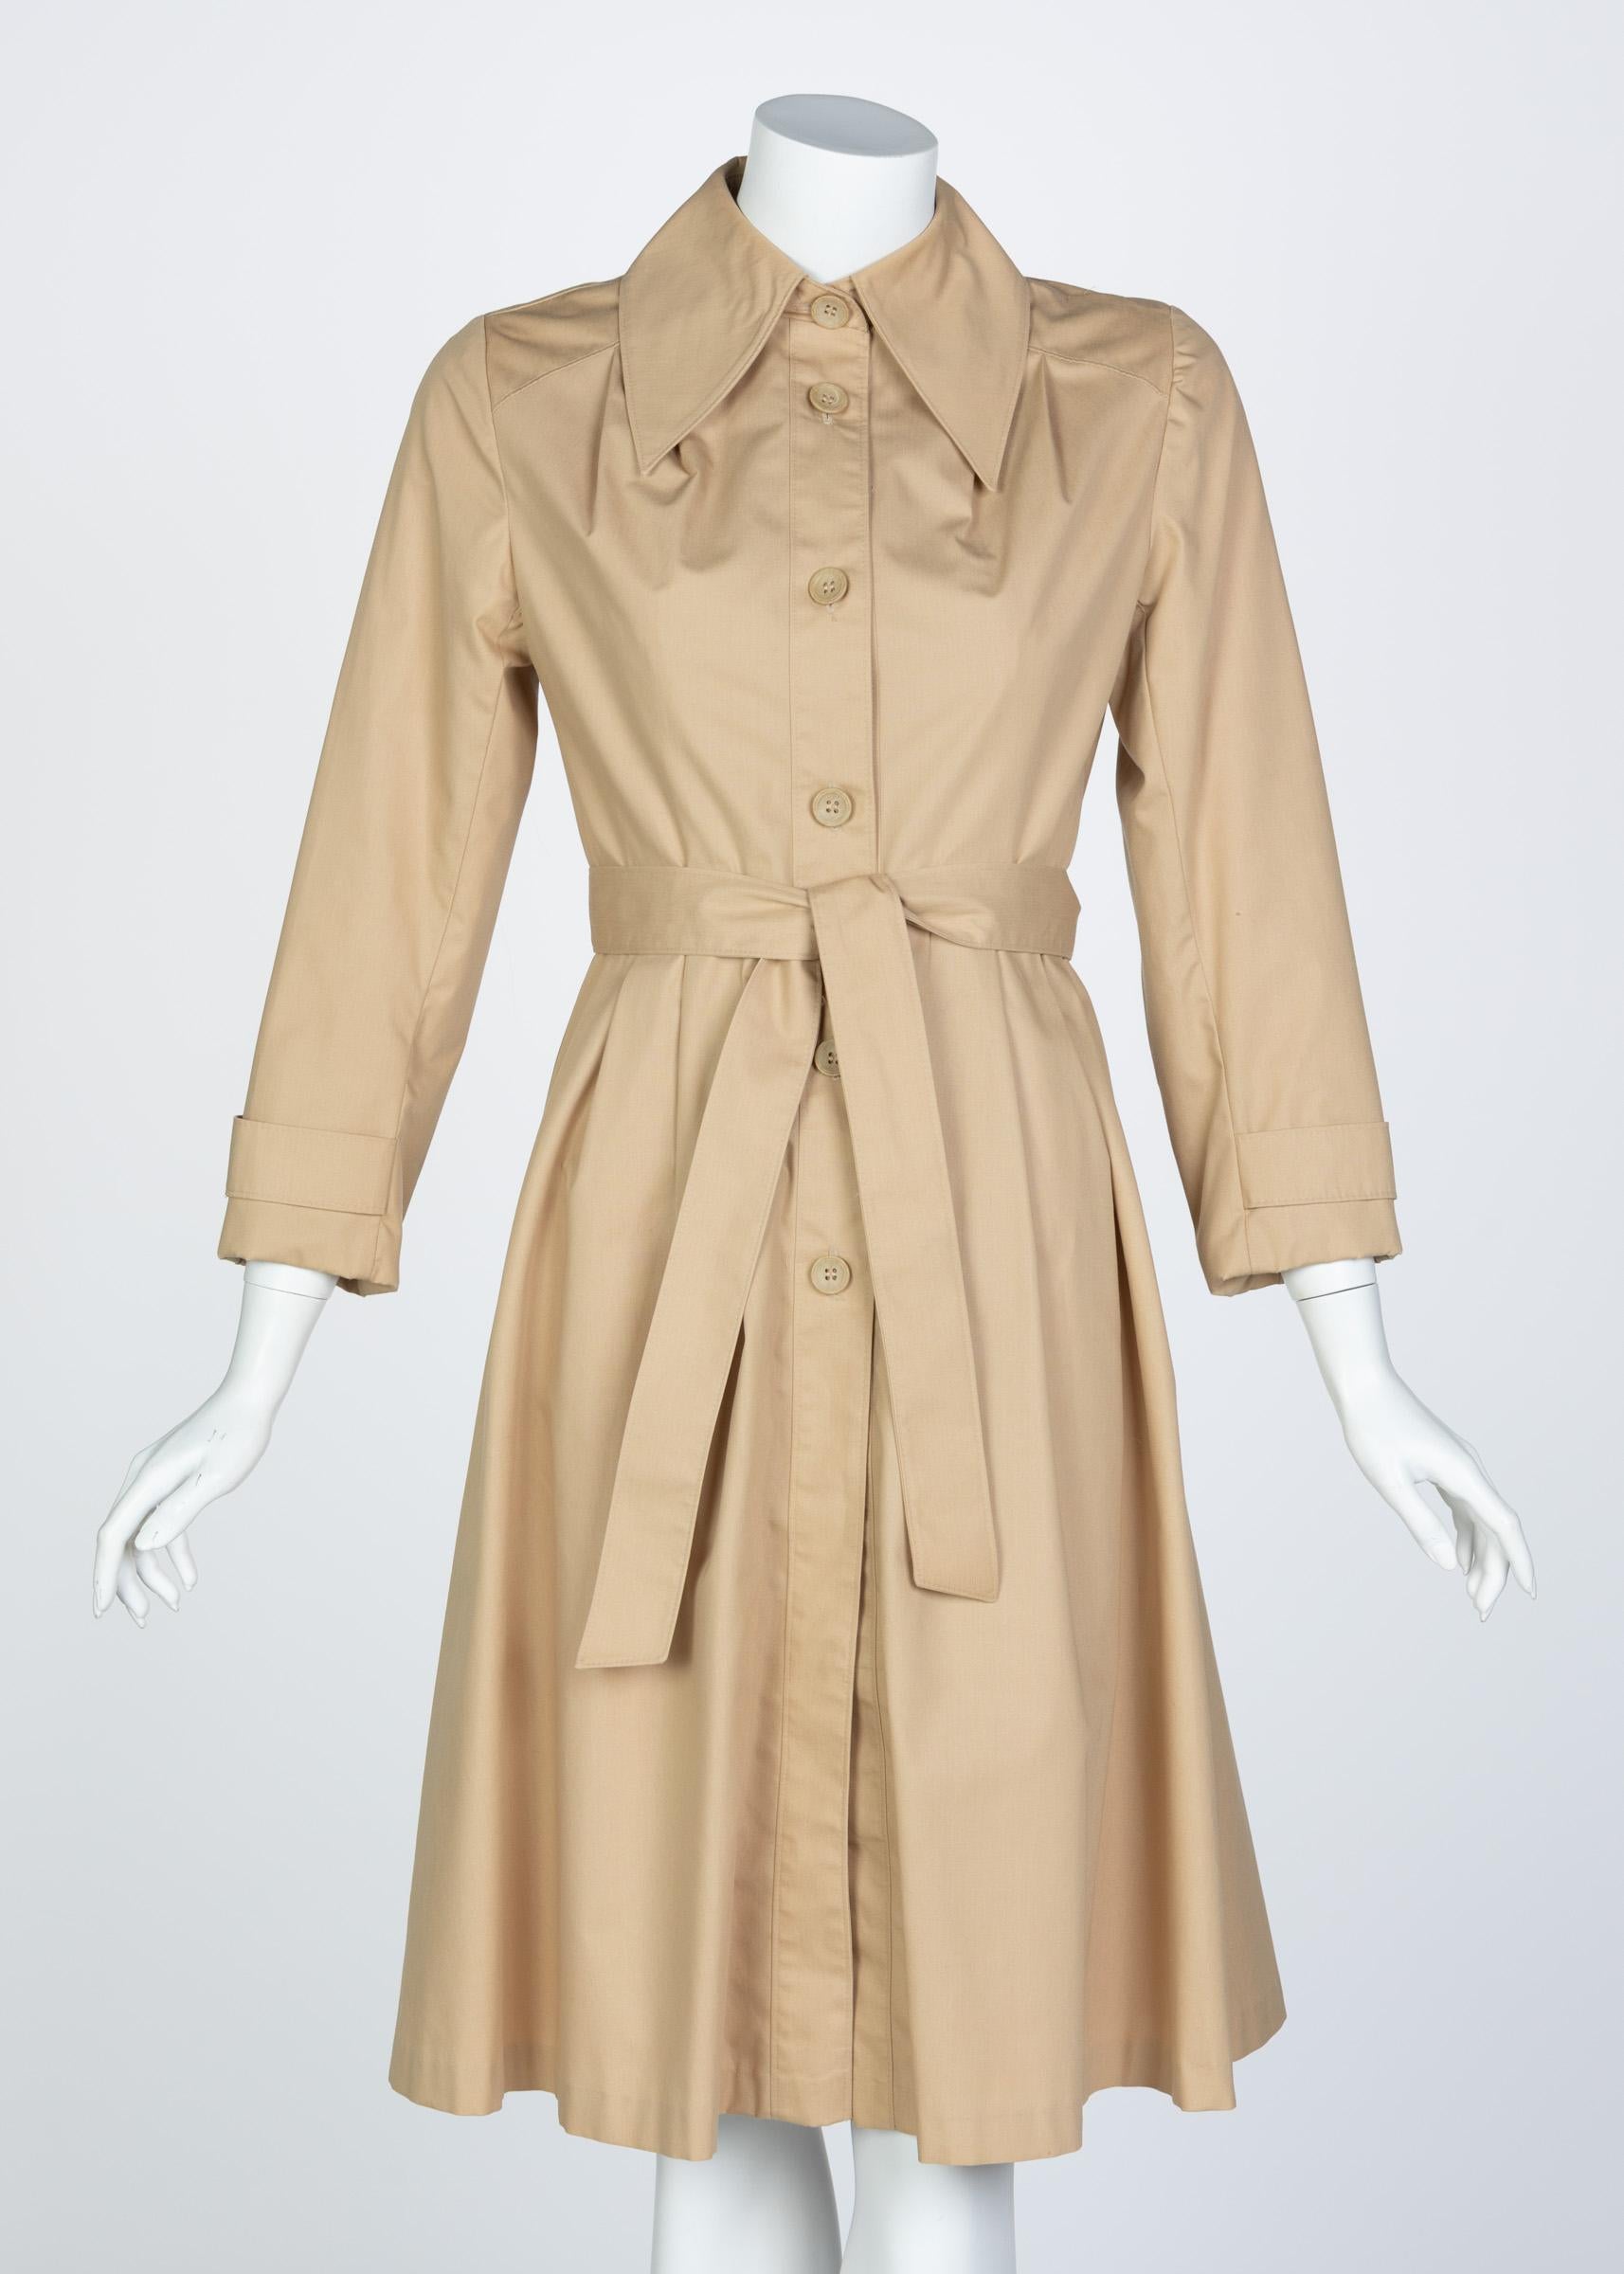 The trench coat is a modern staple. Rising to popularity during mid century wartime, the coat has since become a timeless silhouette that continues to be rehashed and remixed for new tastes and preferences. This vintage trench us done in a classic